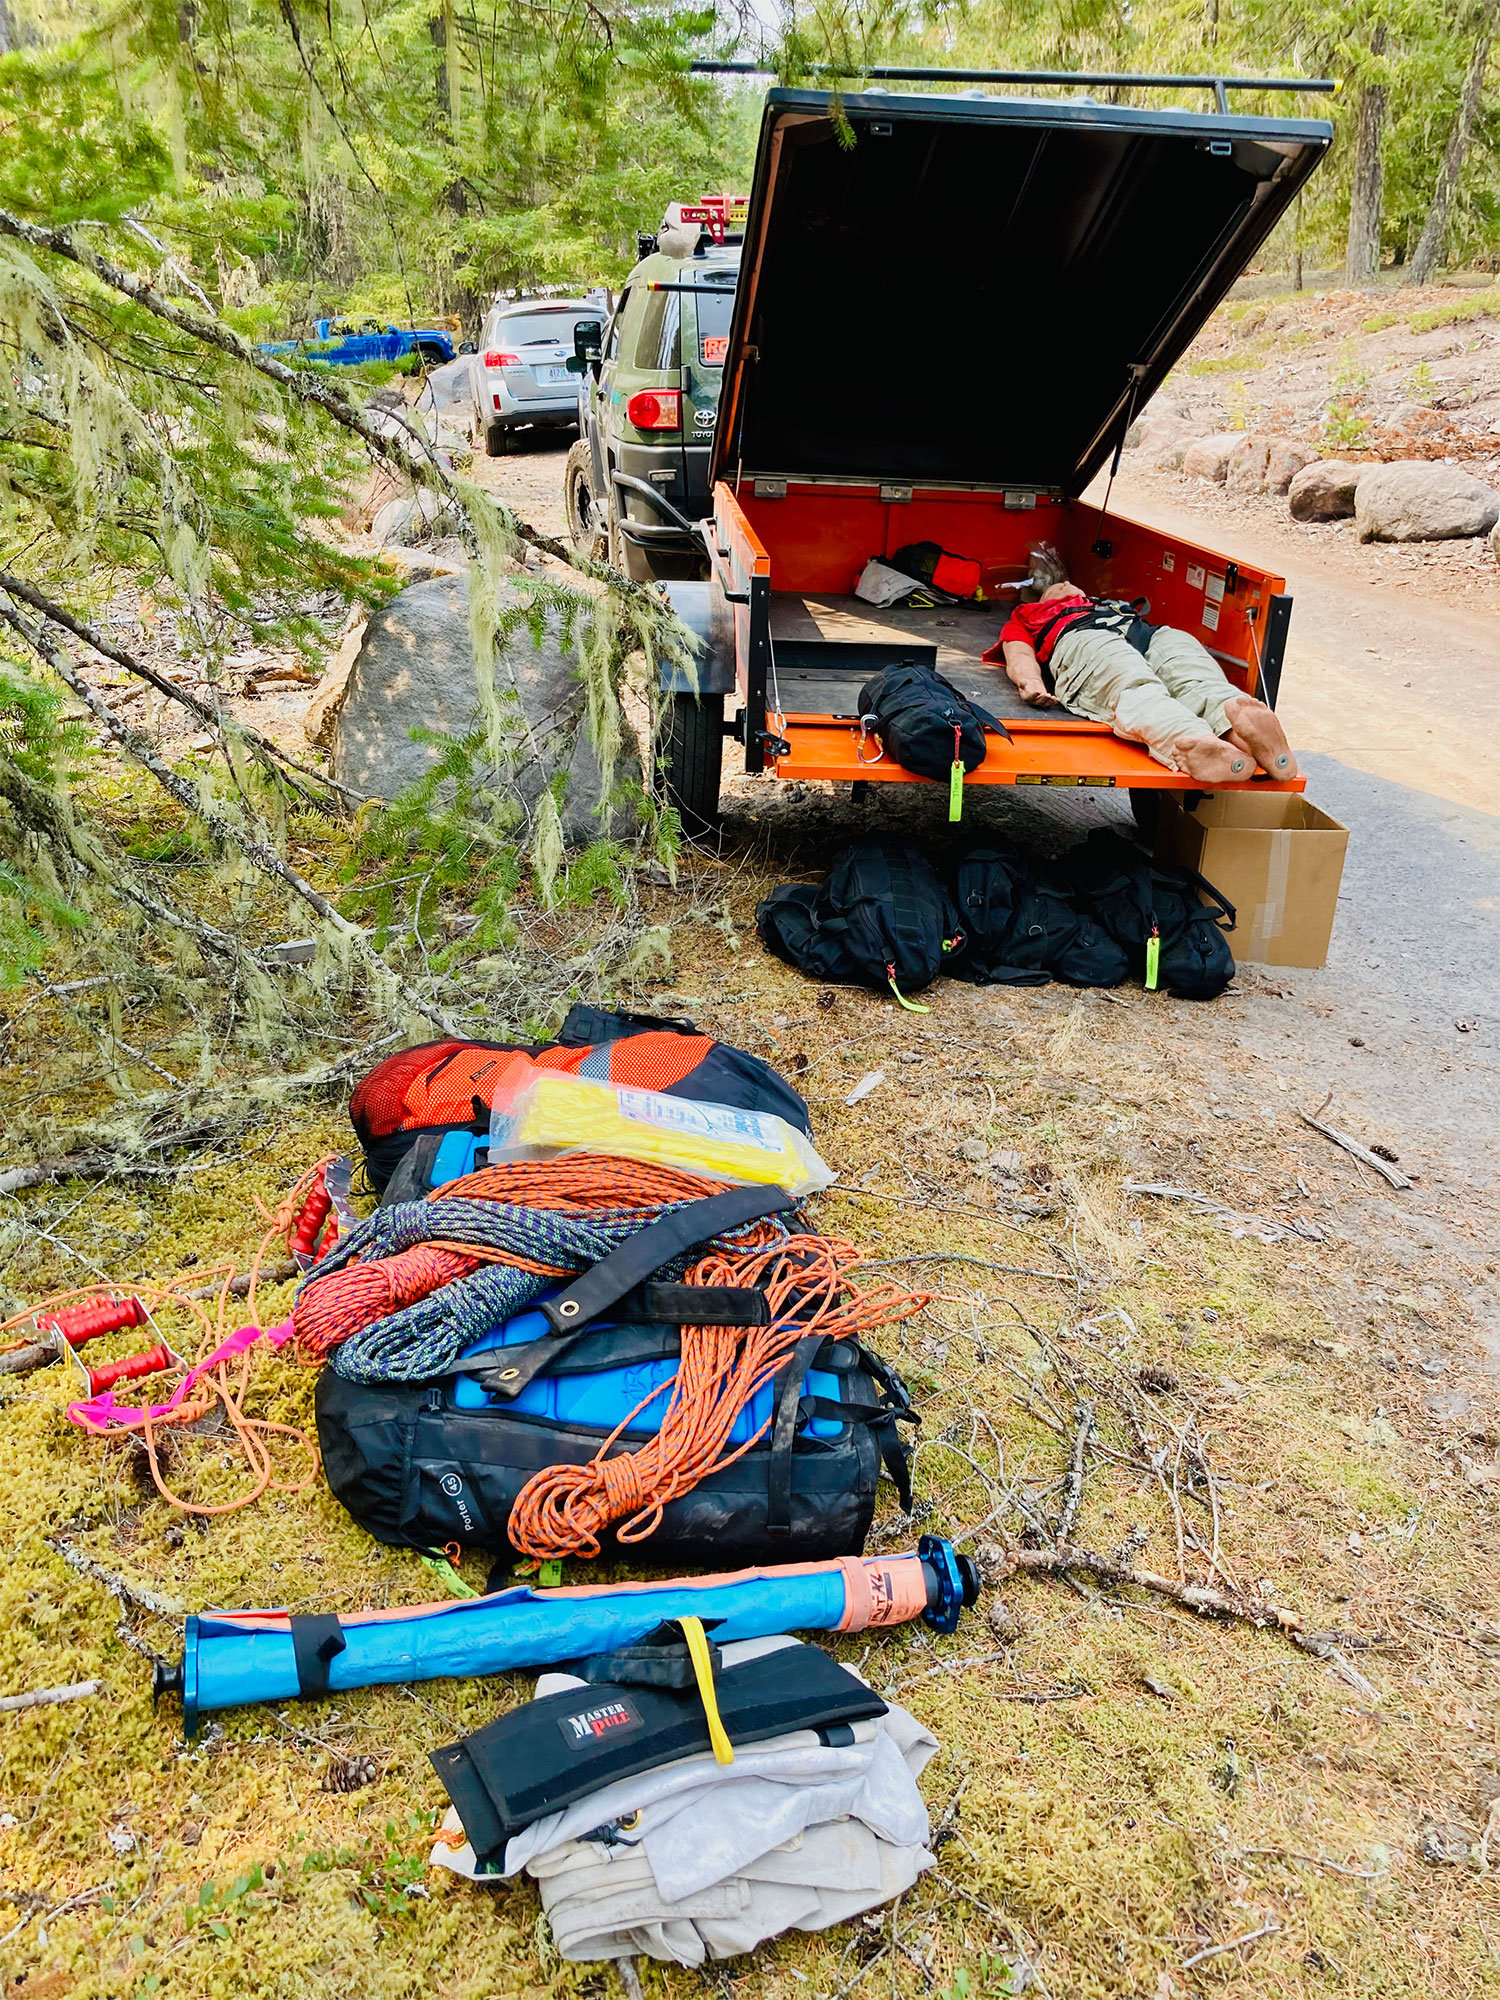 Ropes and other gear spread out on the ground behind a search and rescue vehicle with trailer